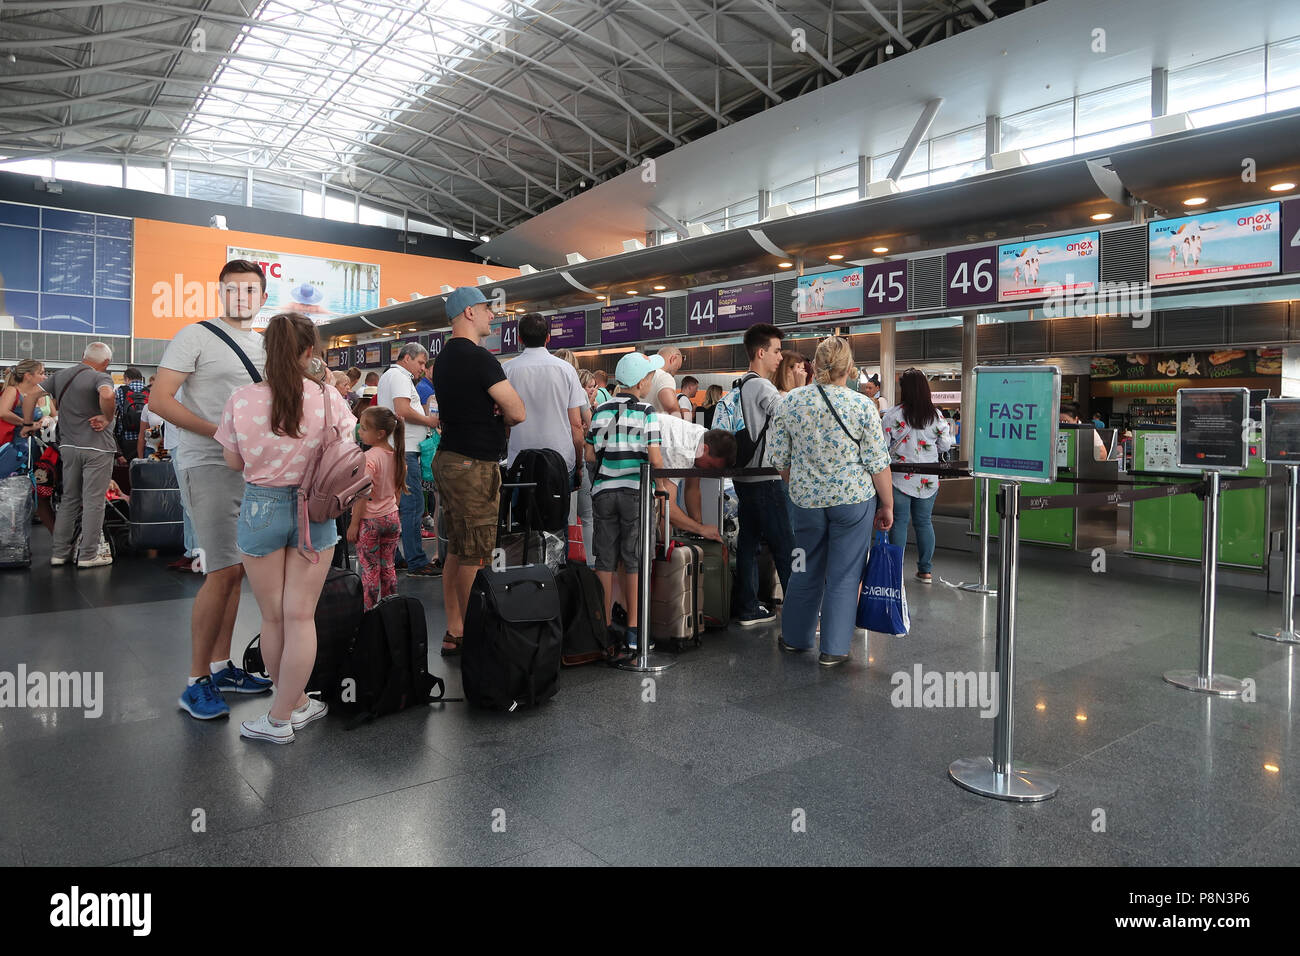 Travelers wait in line to check-in at Boryspil International Airport east of Kiev capital of Ukraine Stock Photo